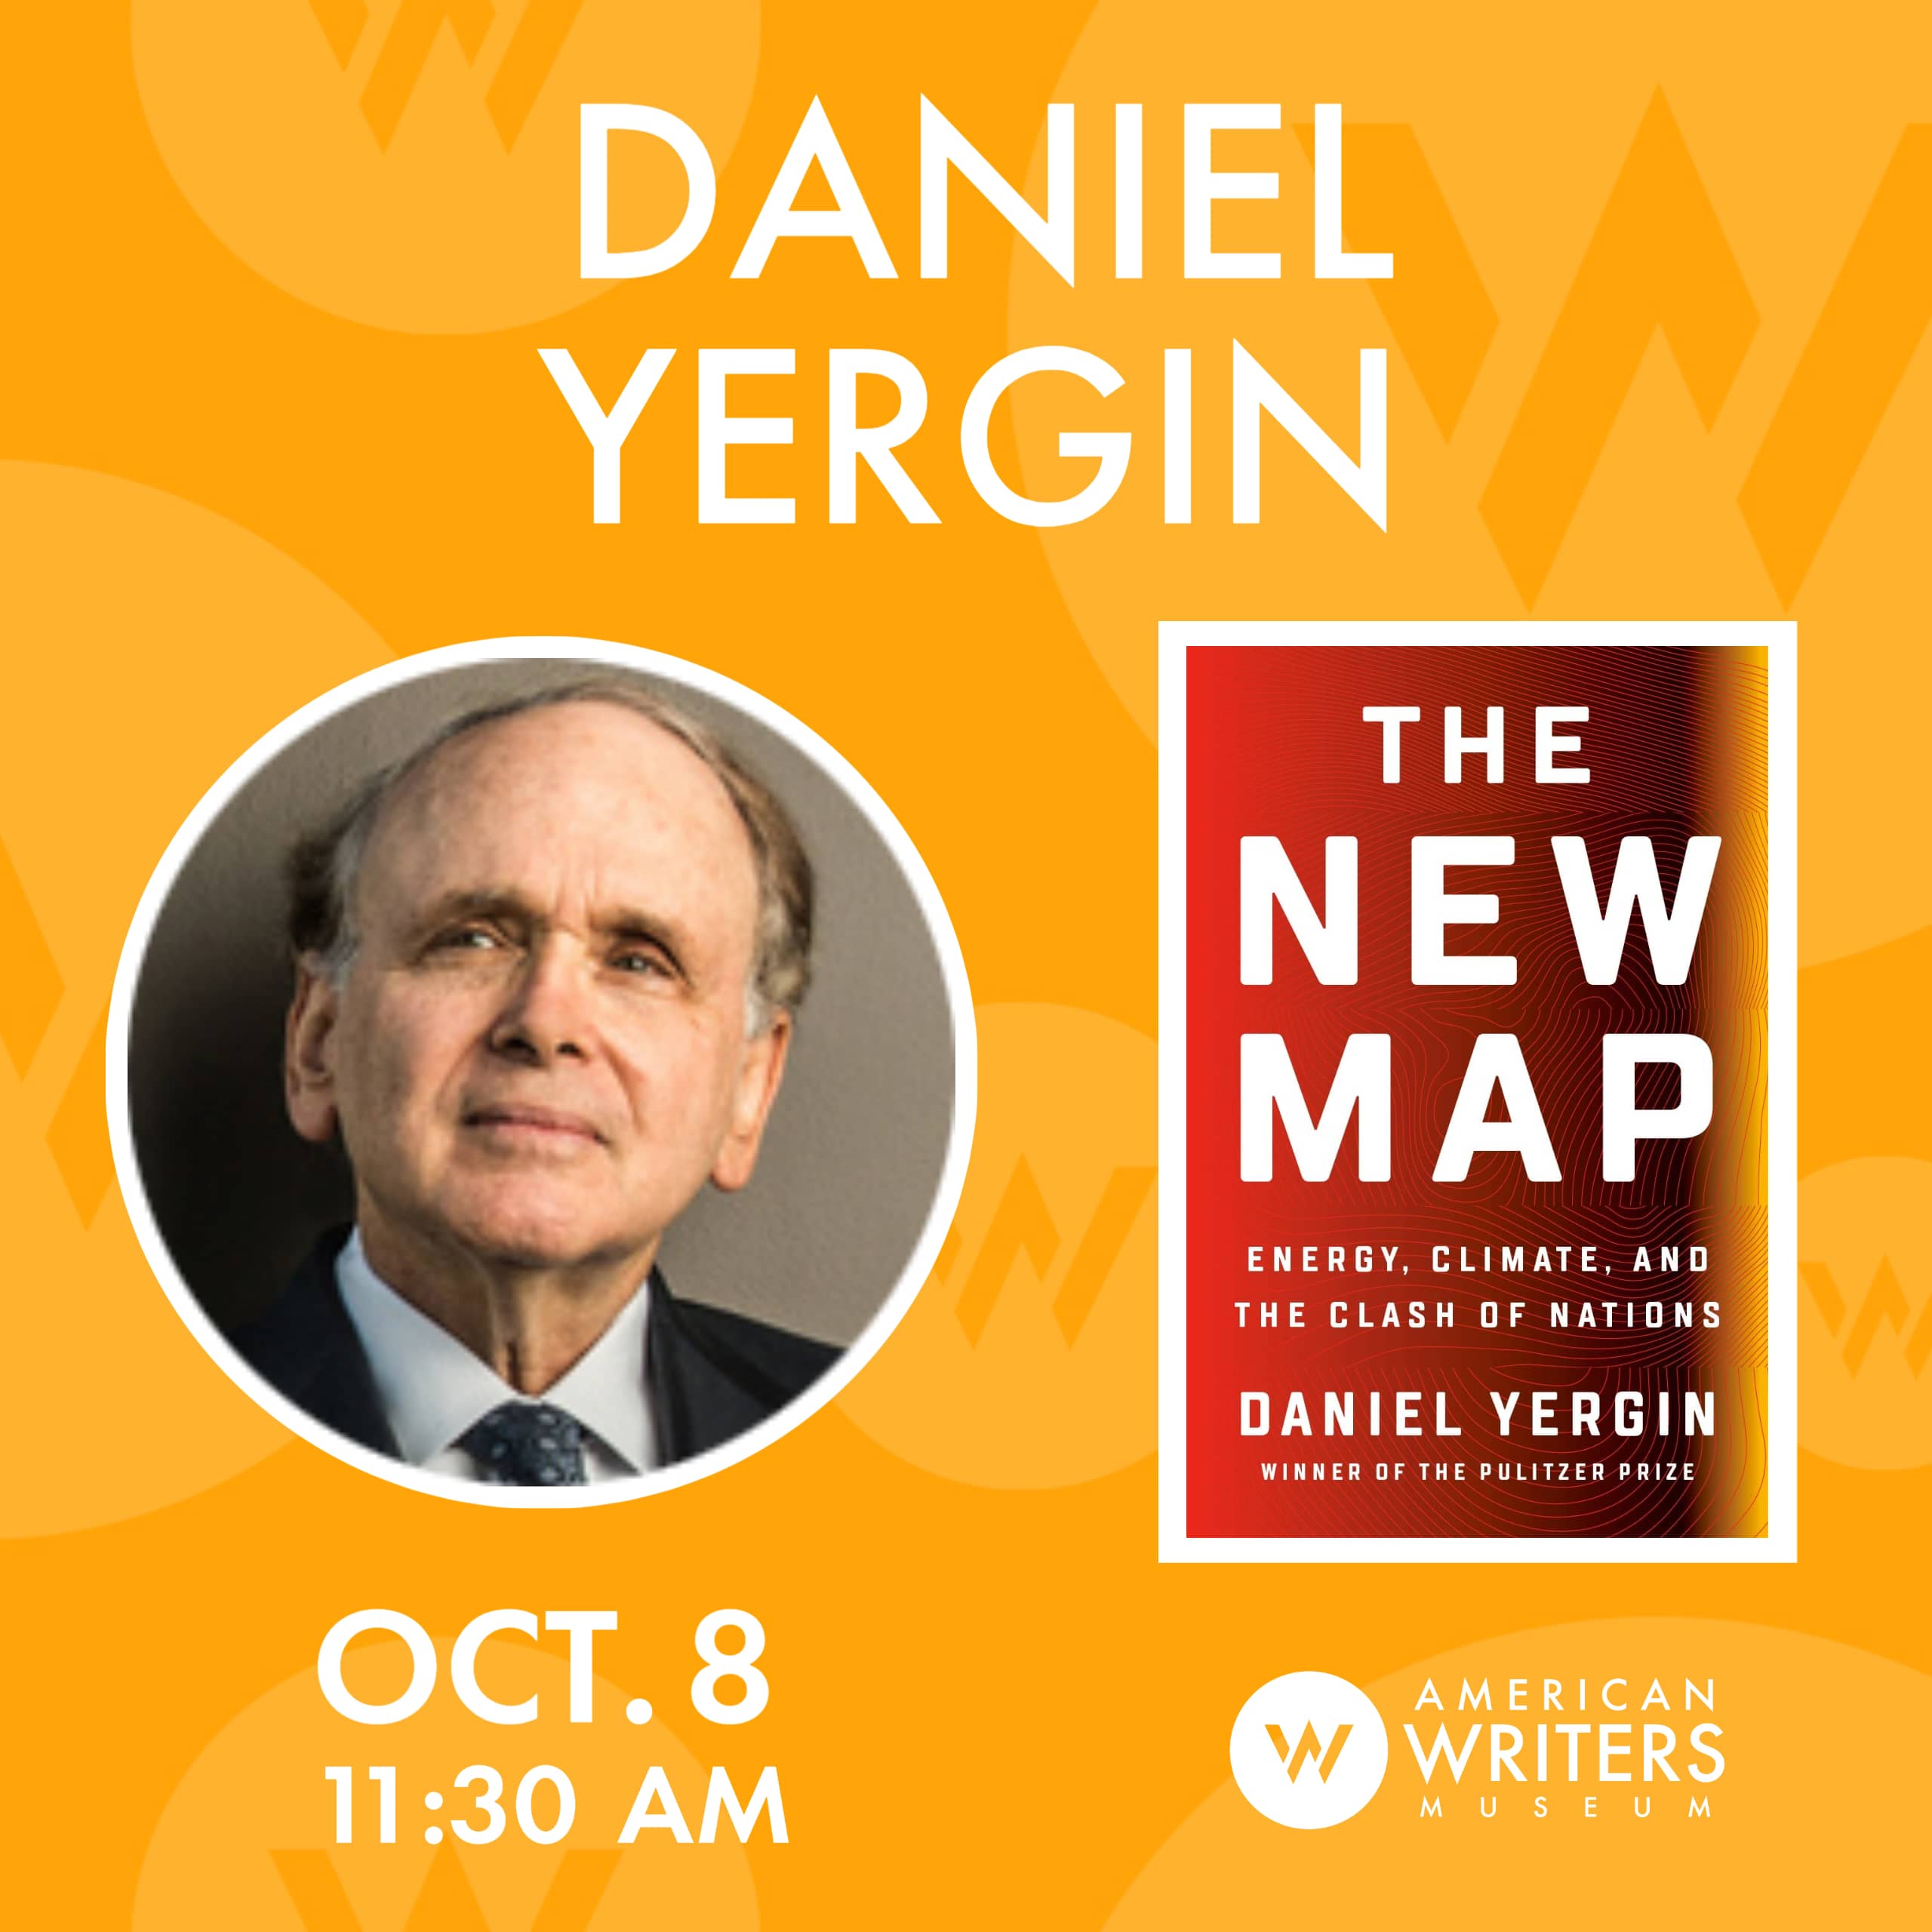 American Writers Museum presents a conversation with Daniel Yergin about his new book The New Map on October 8 at 11:30 am central